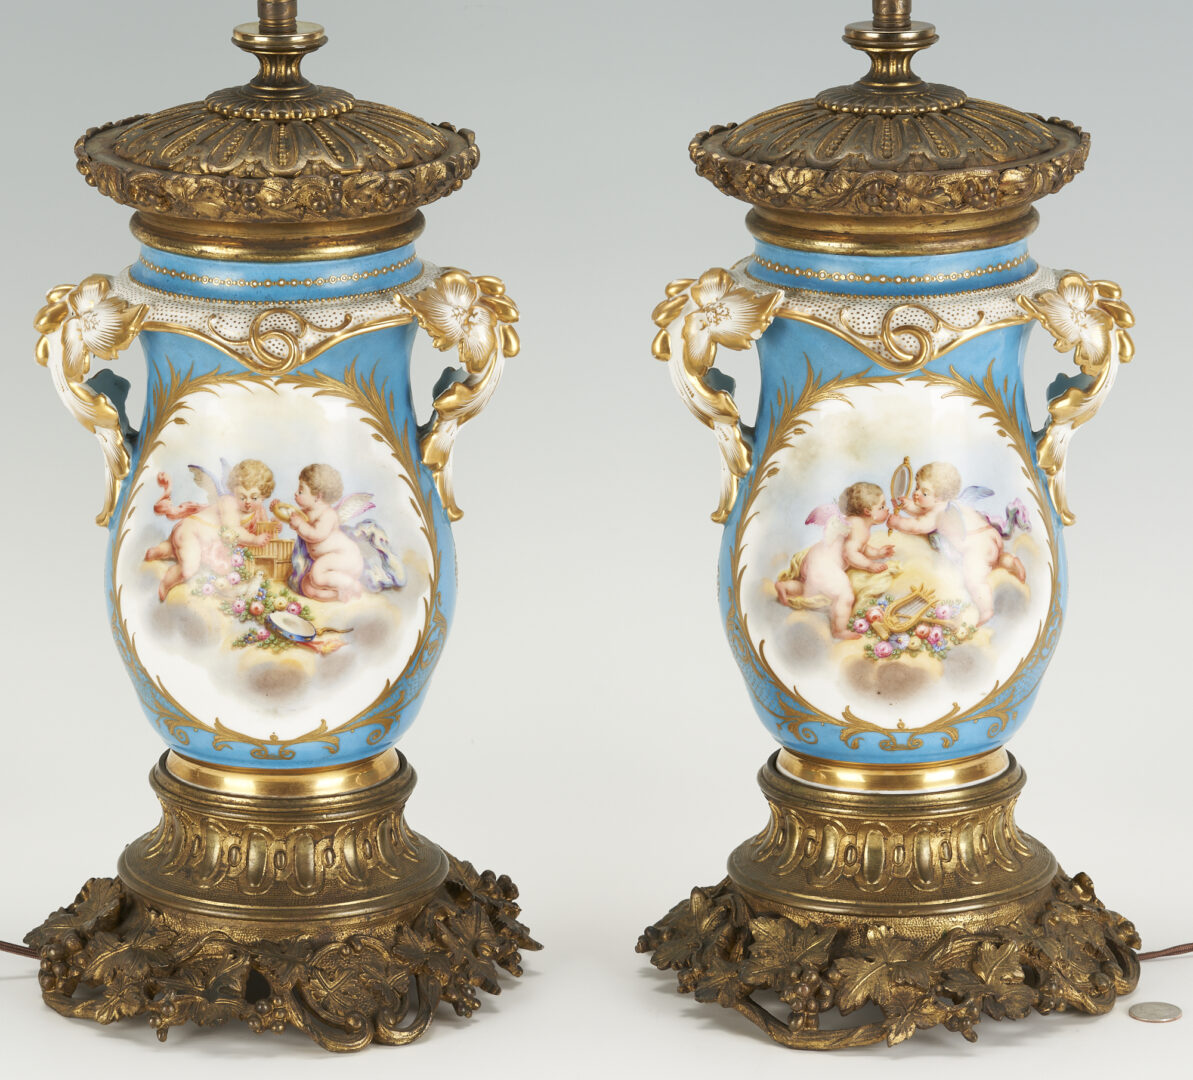 Lot 225: Pair of Sevres Style Porcelain Urns, Mounted as Lamps